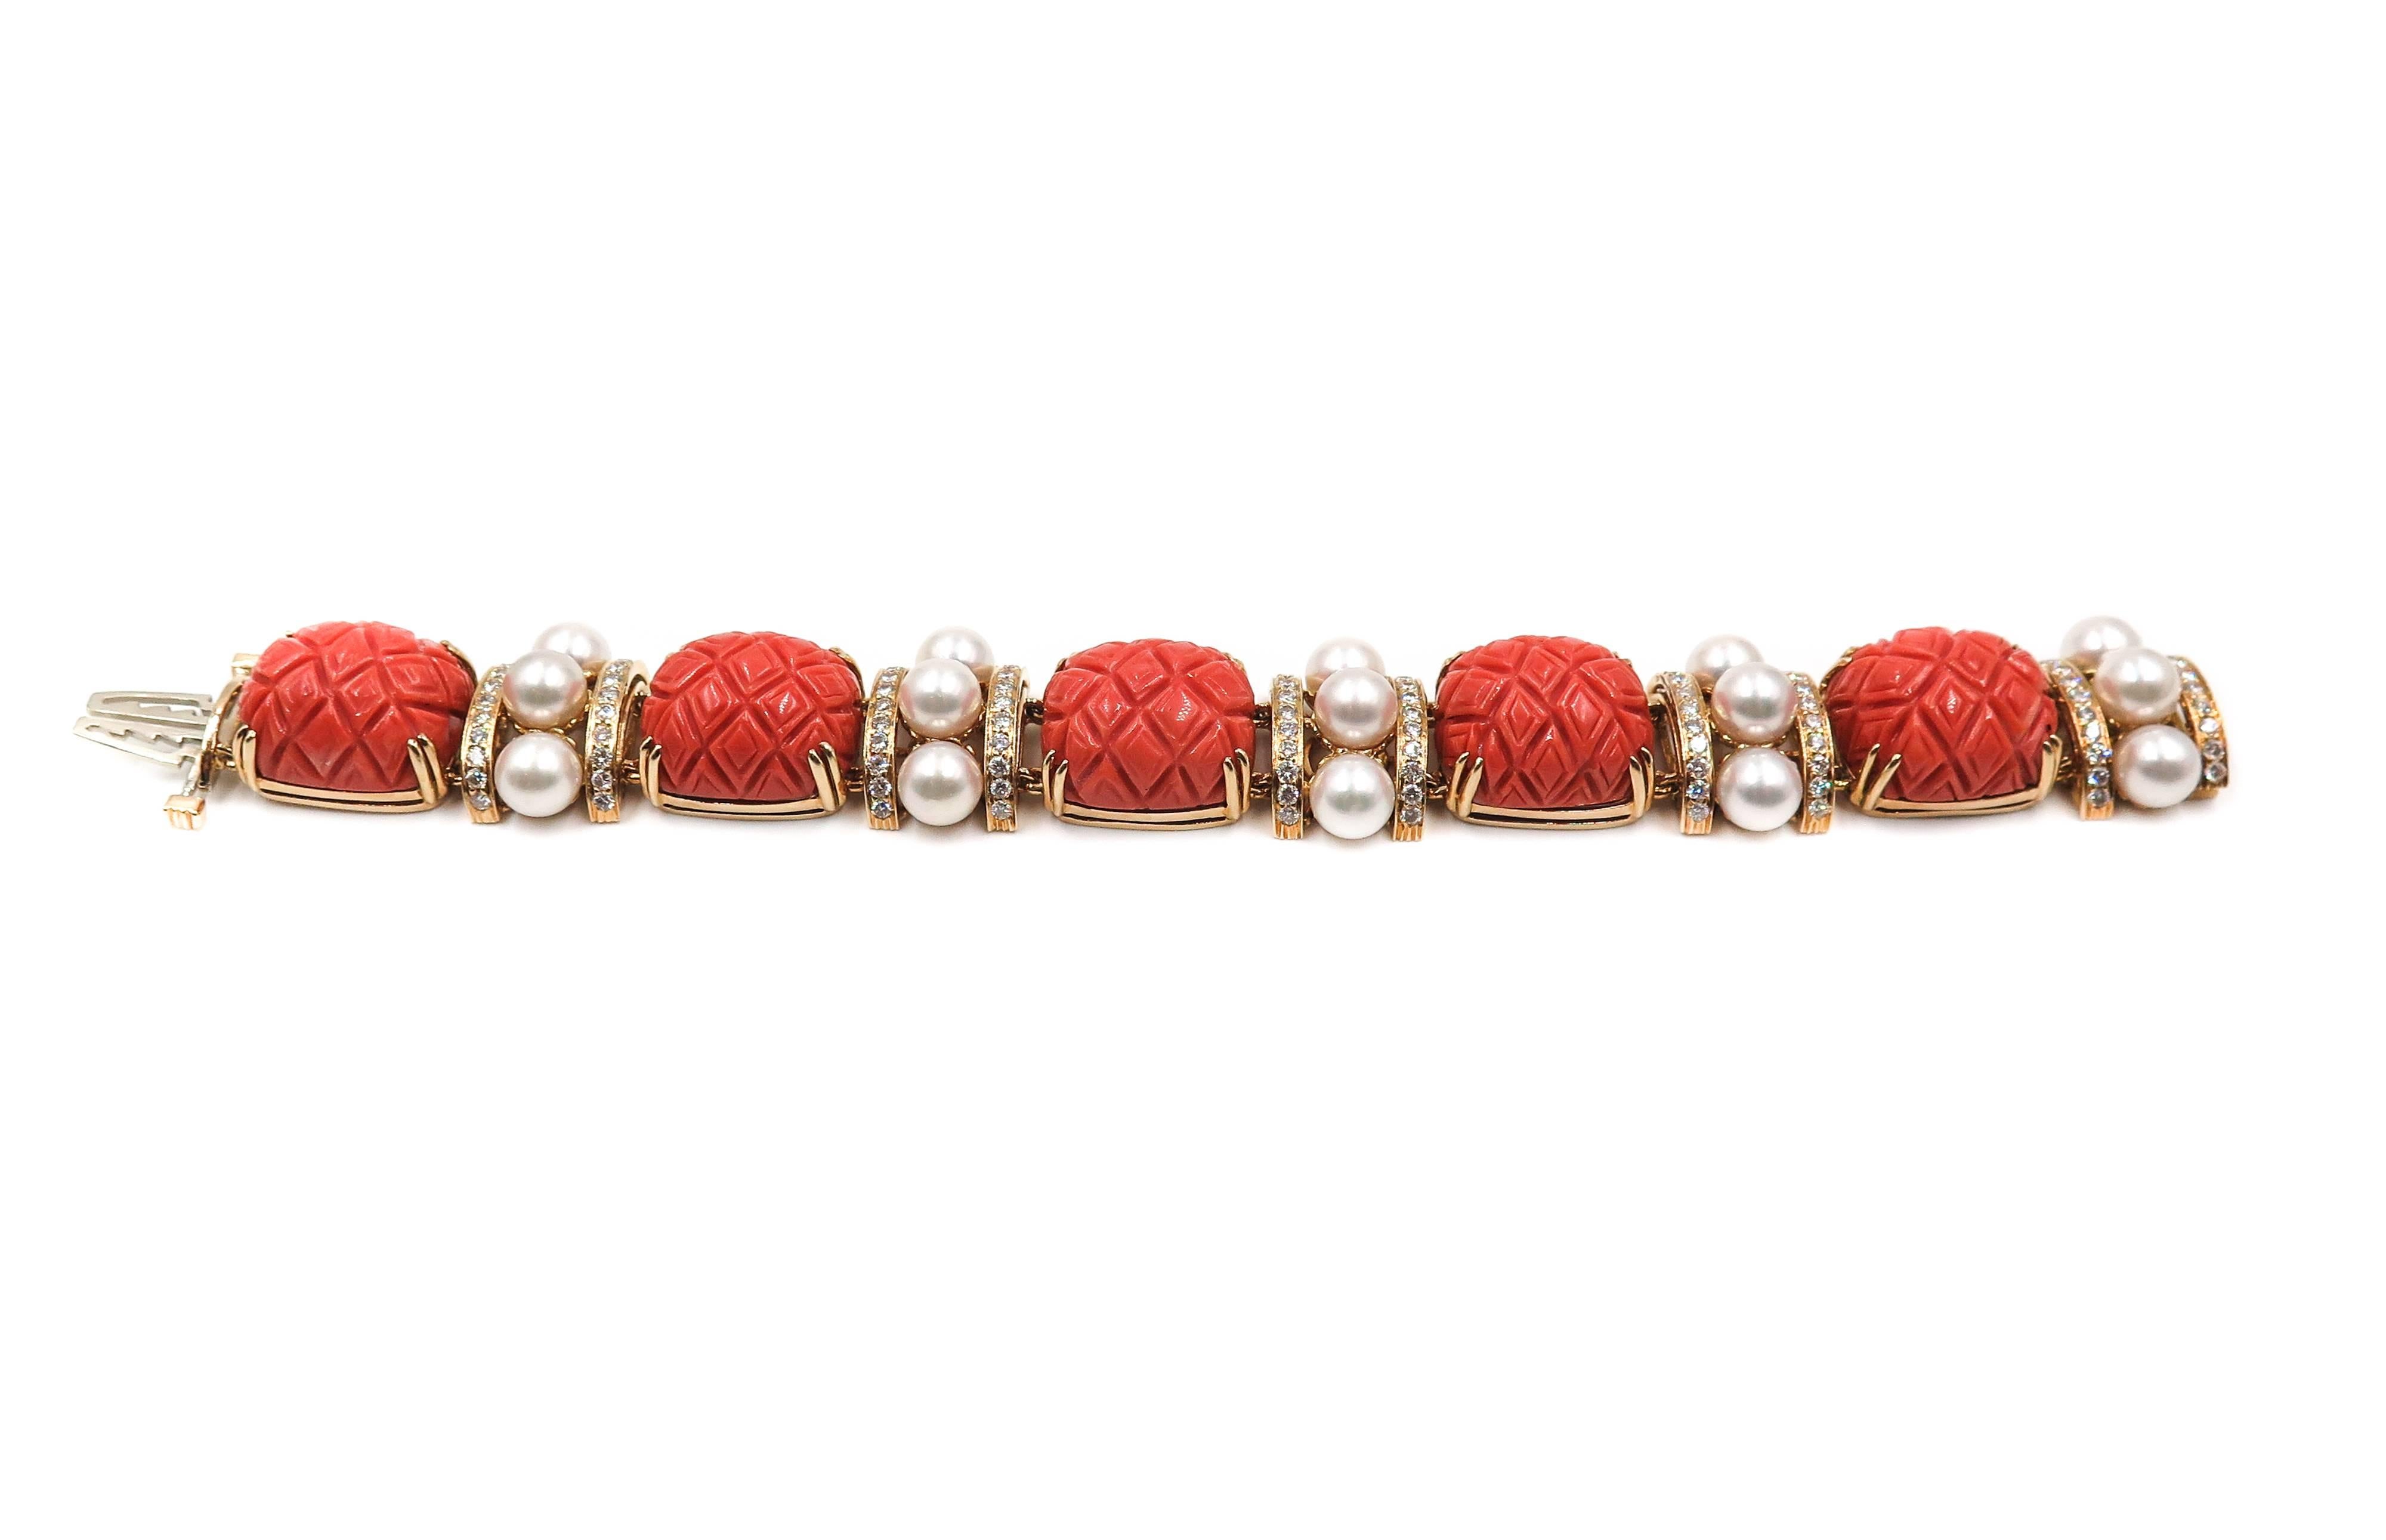 Artist Carved Coral, Pearls and Diamond Bracelet by Seaman Schepps